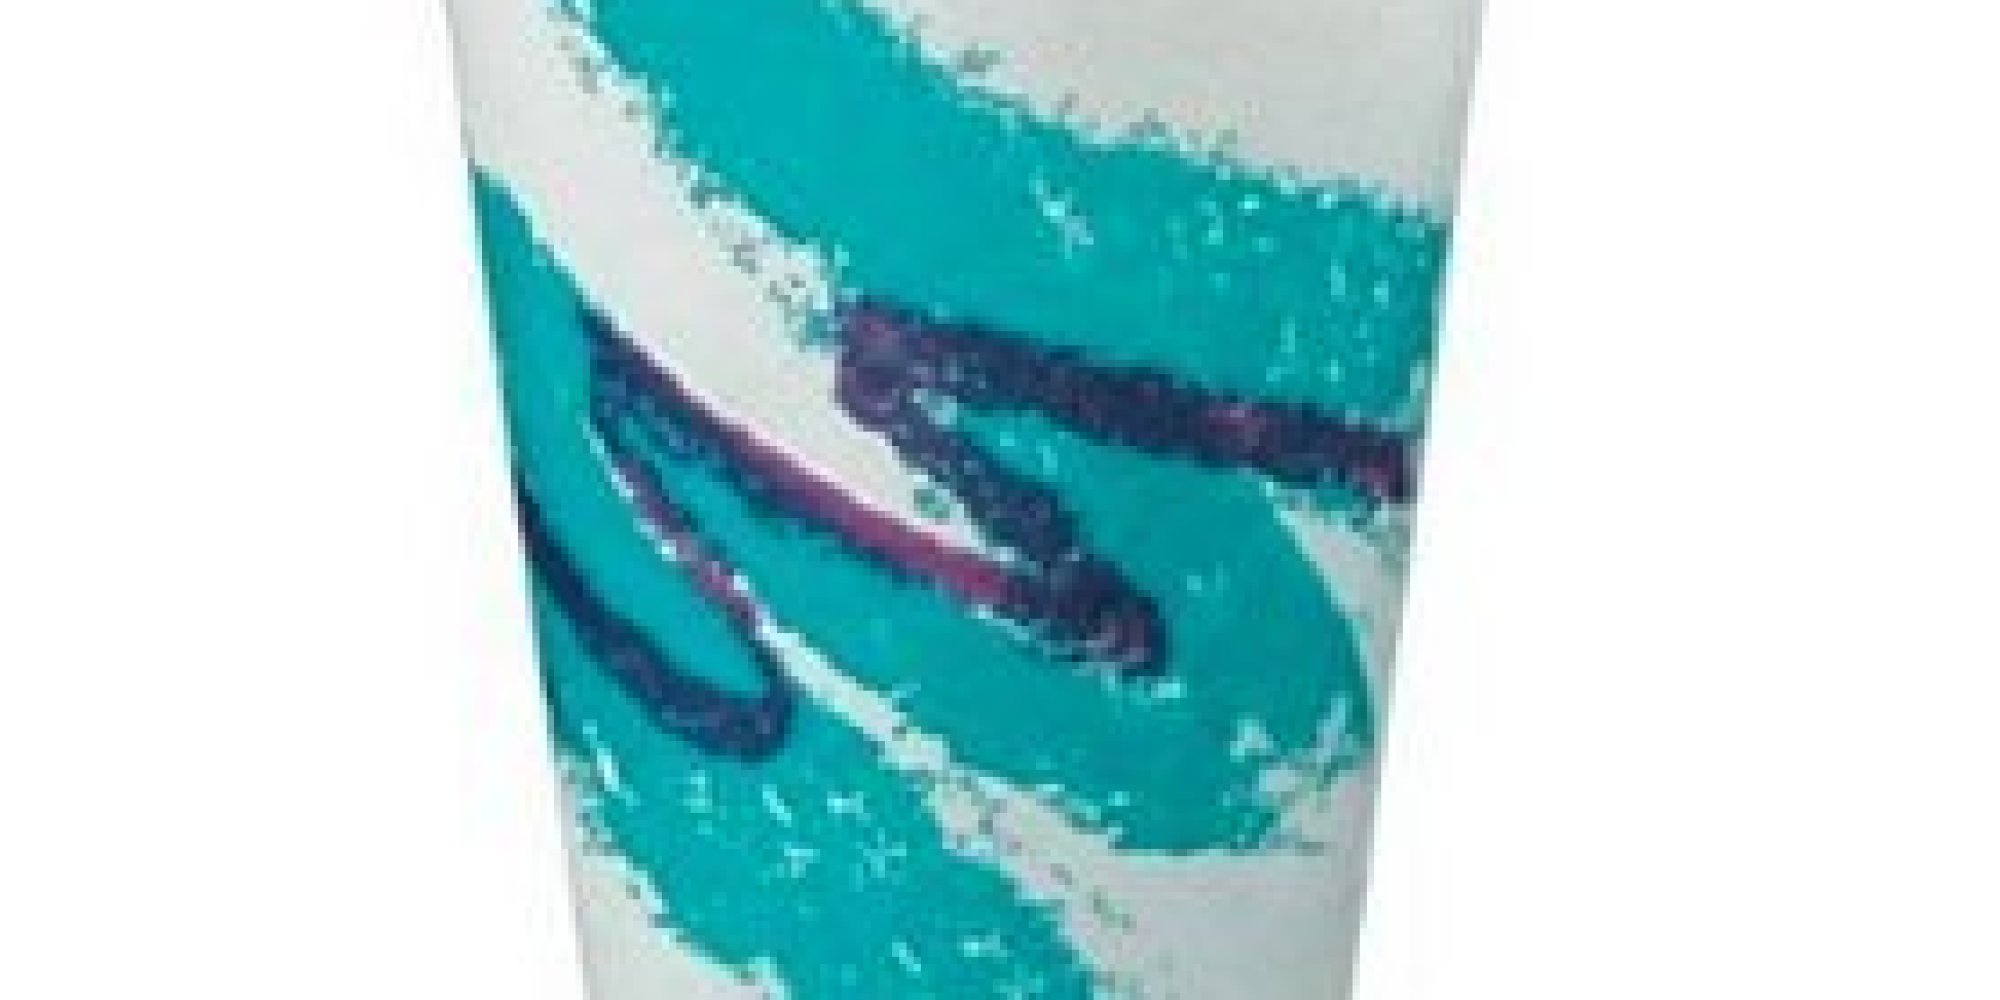 You Know That Waxy Turquoise And Purple Cup That's So '90s? Meet Its